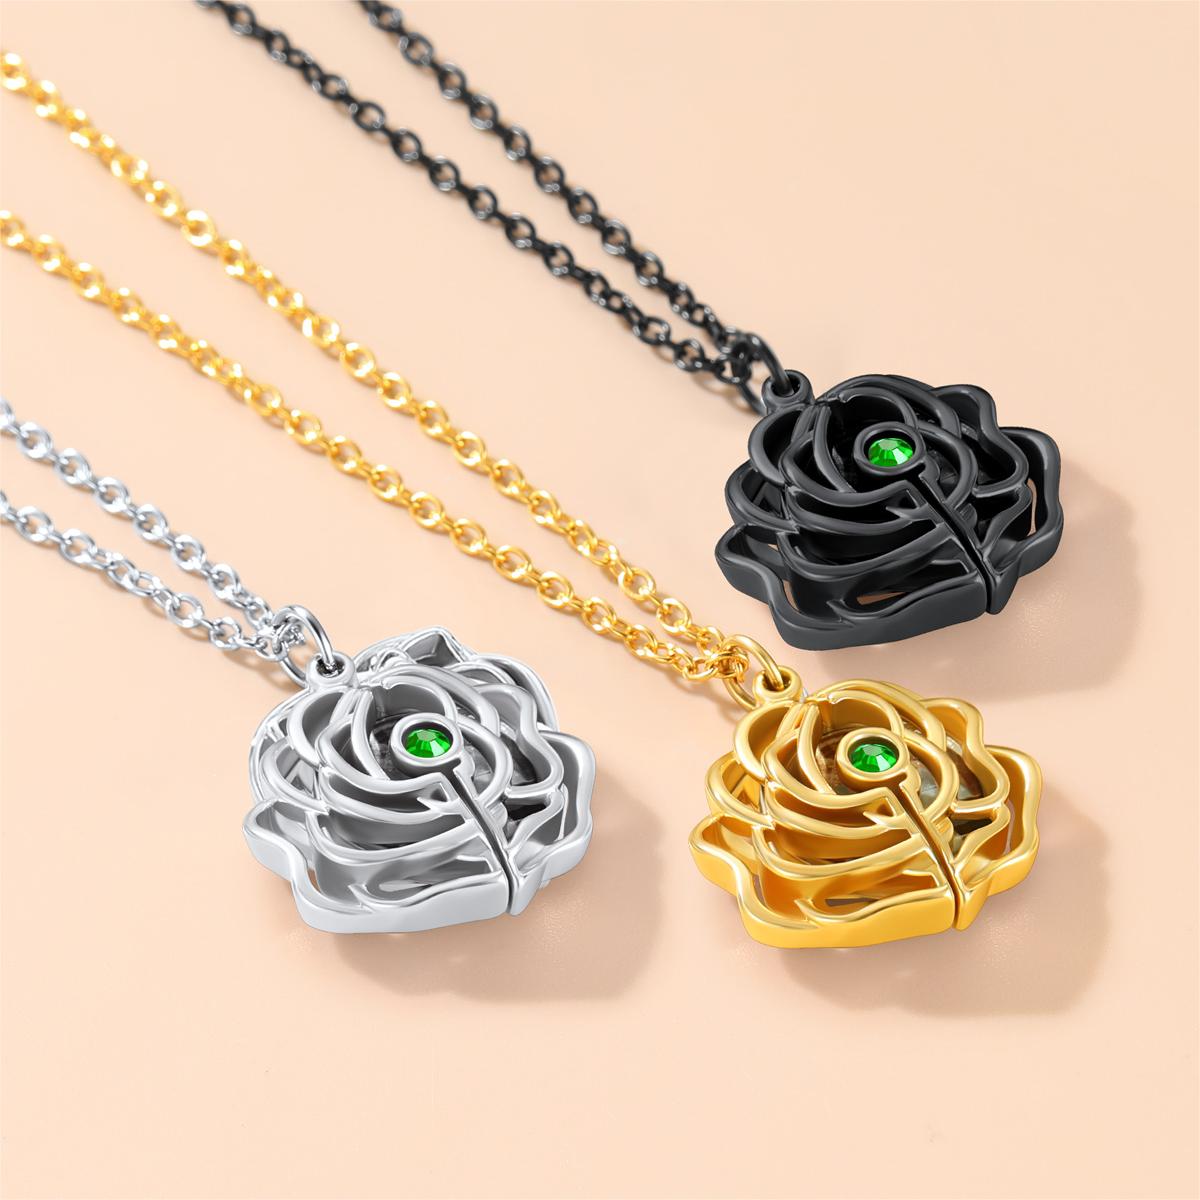 Birthstonesjewelry Personalized Rose Flower Locket Necklace 3 Colors